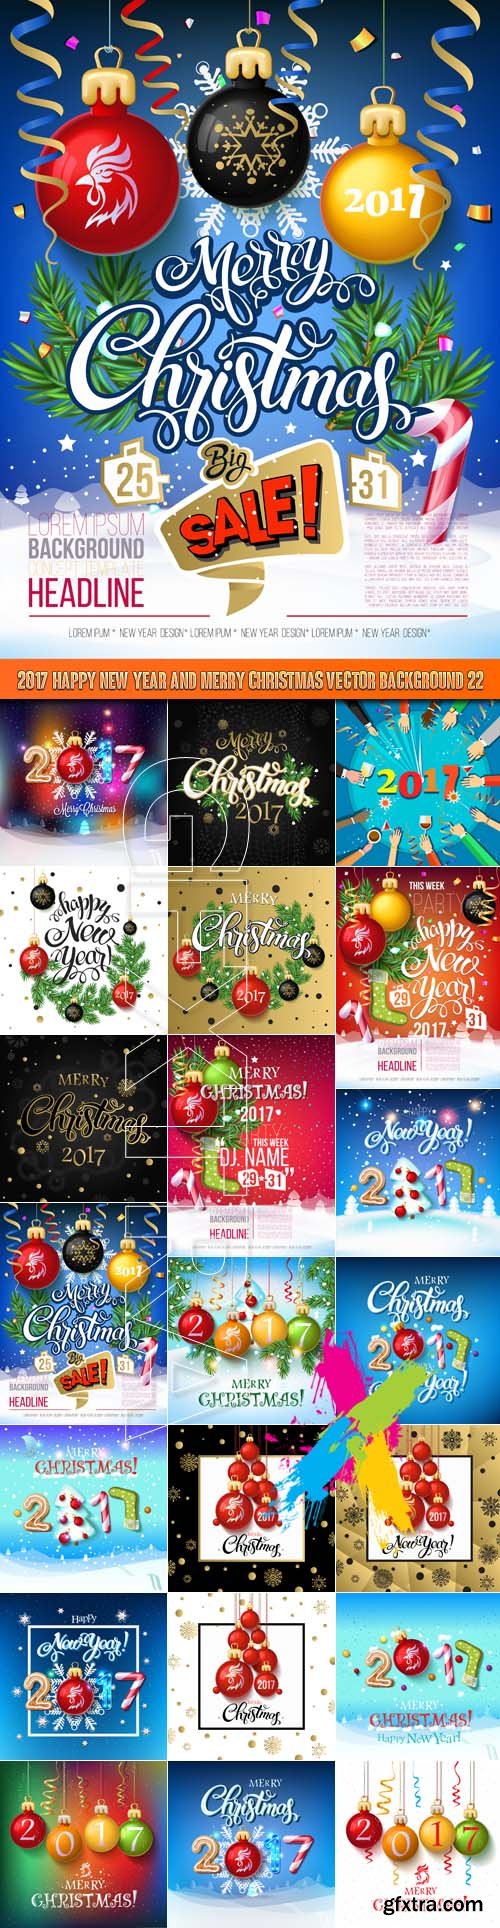 2017 Happy New Year and Merry Christmas vector background 22